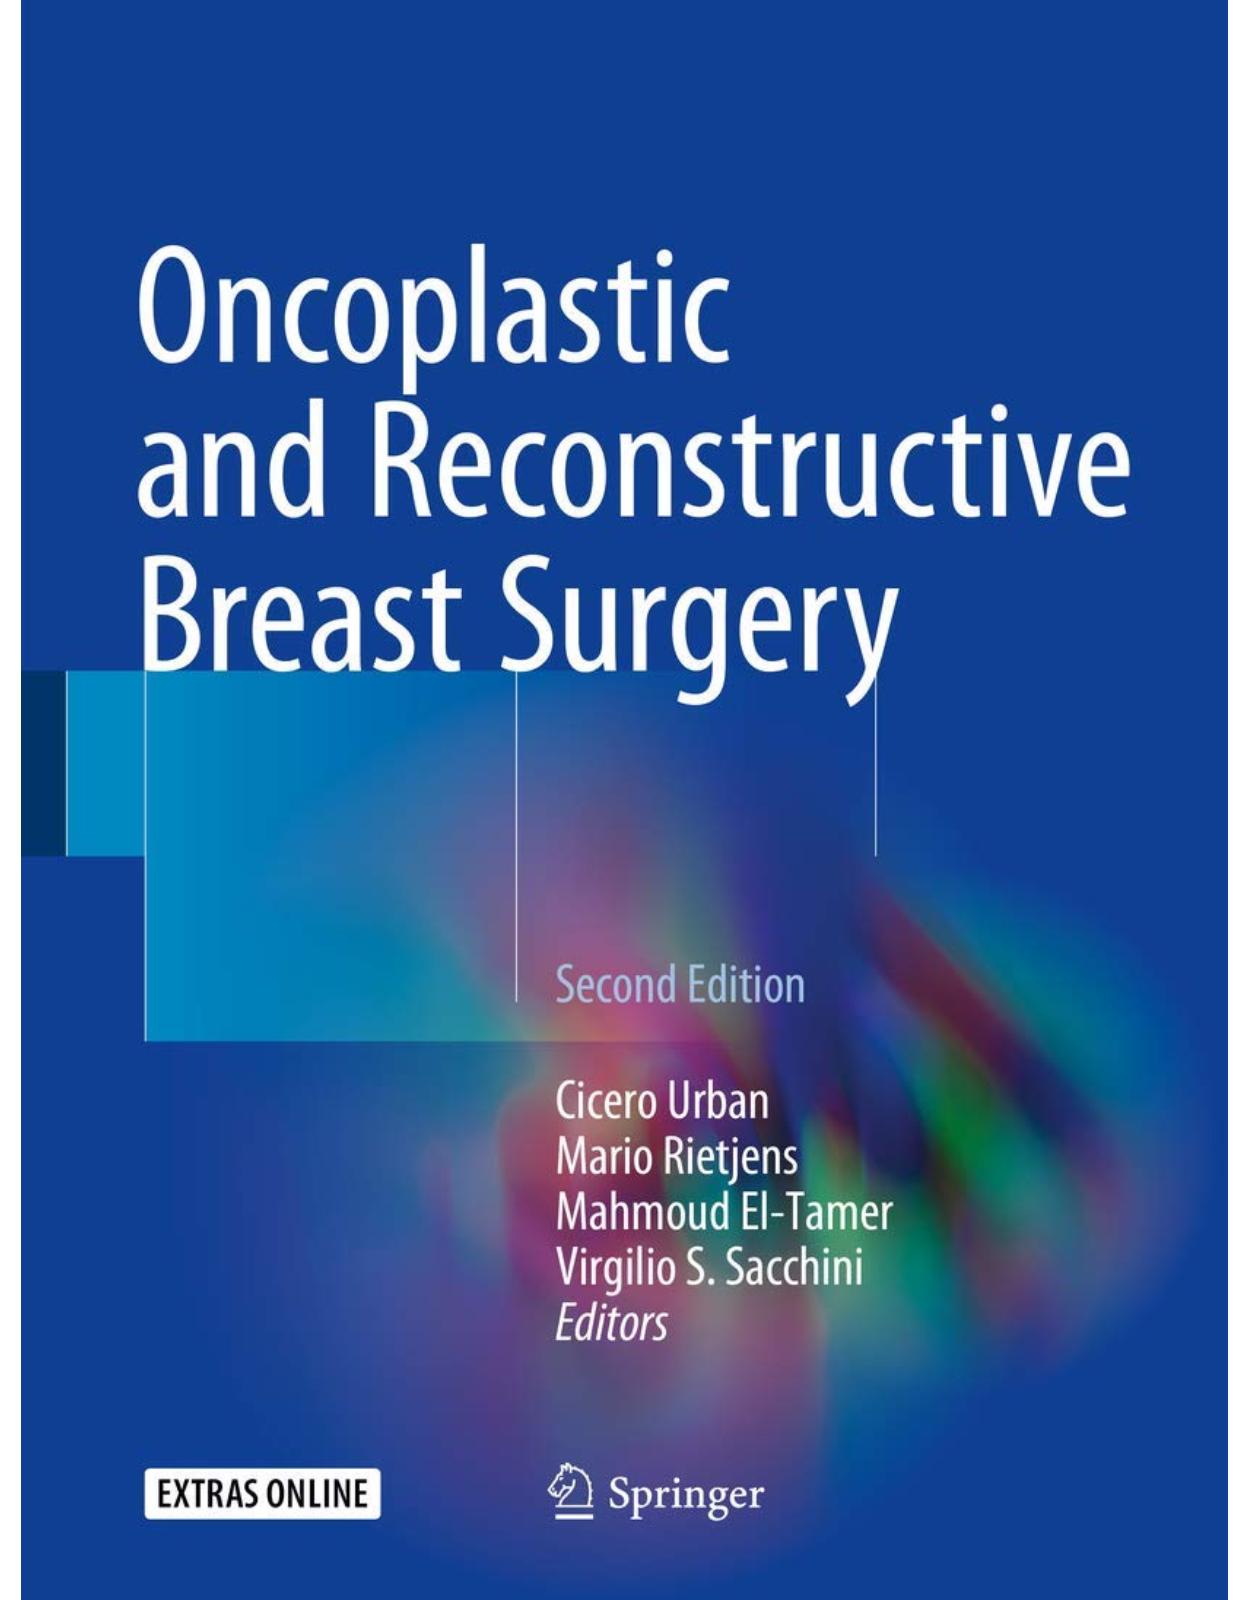 Oncoplastic and Reconstructive Breast Surgery